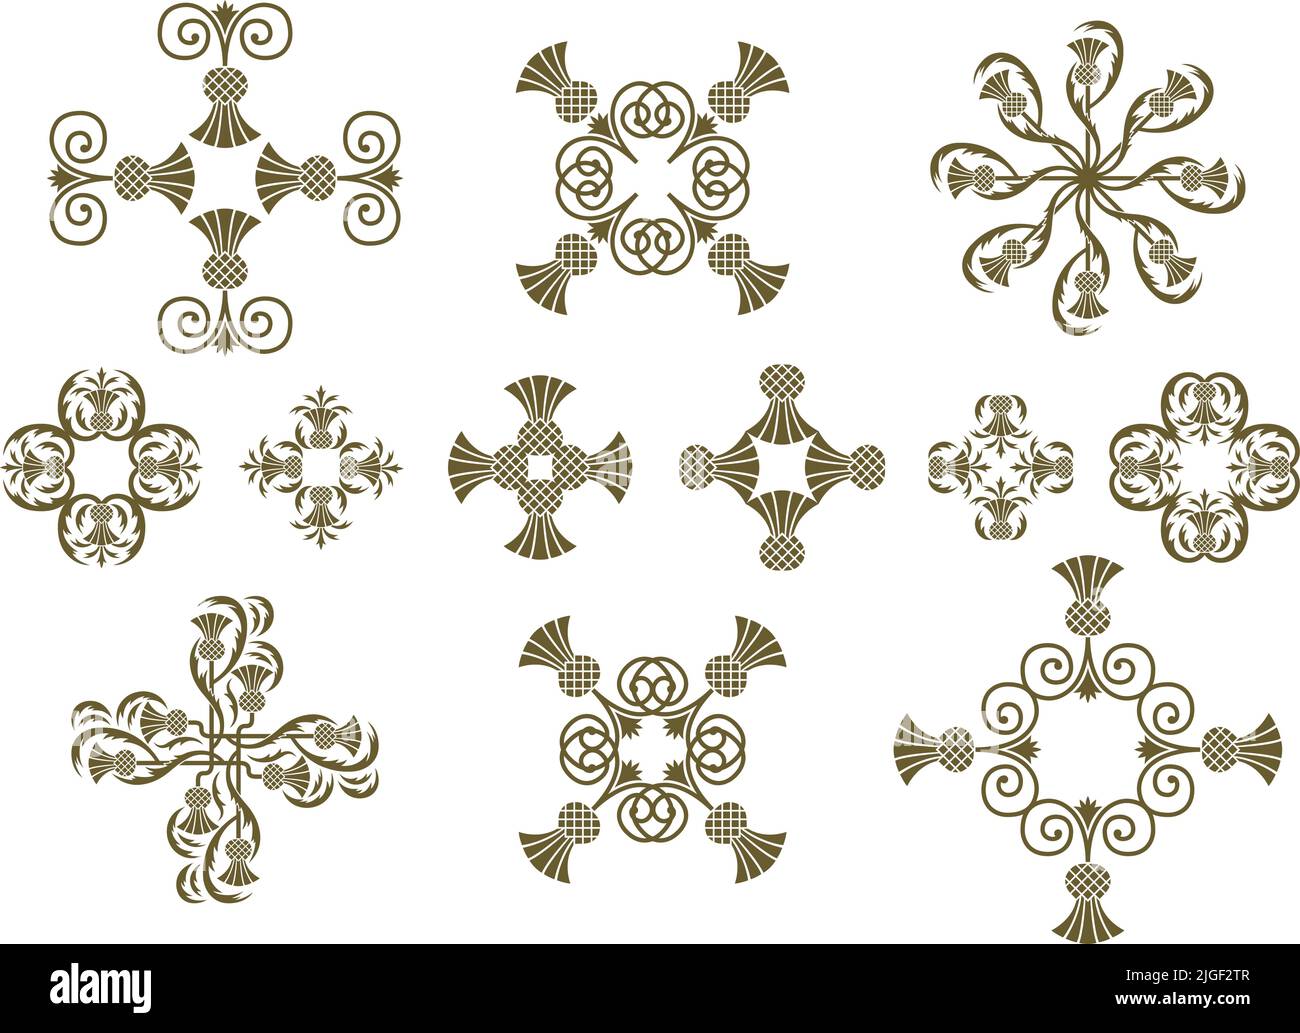 A series of vector Art Nouveau floral icons and decorative elements. Stock Vector